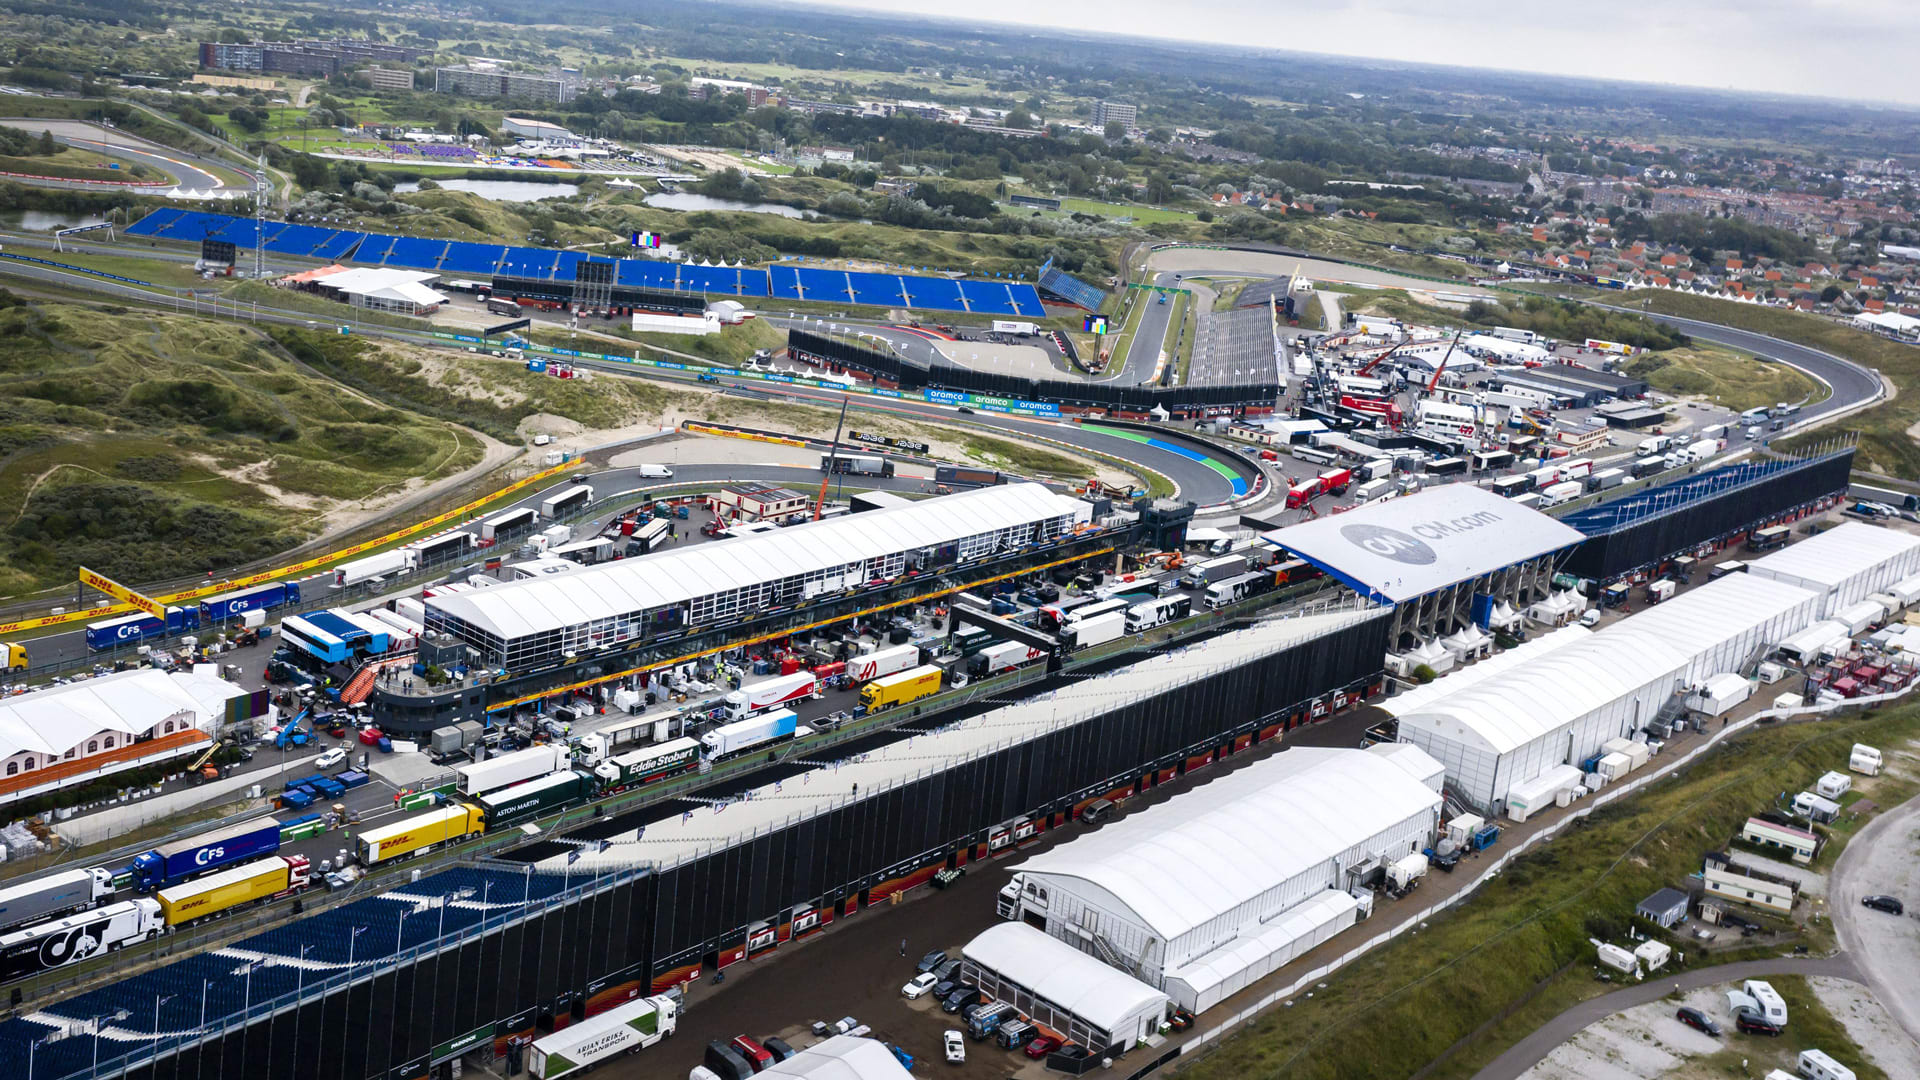 What time is the 2021 F1 Dutch Grand Prix at Zandvoort and how can I watch it? Formula 1®